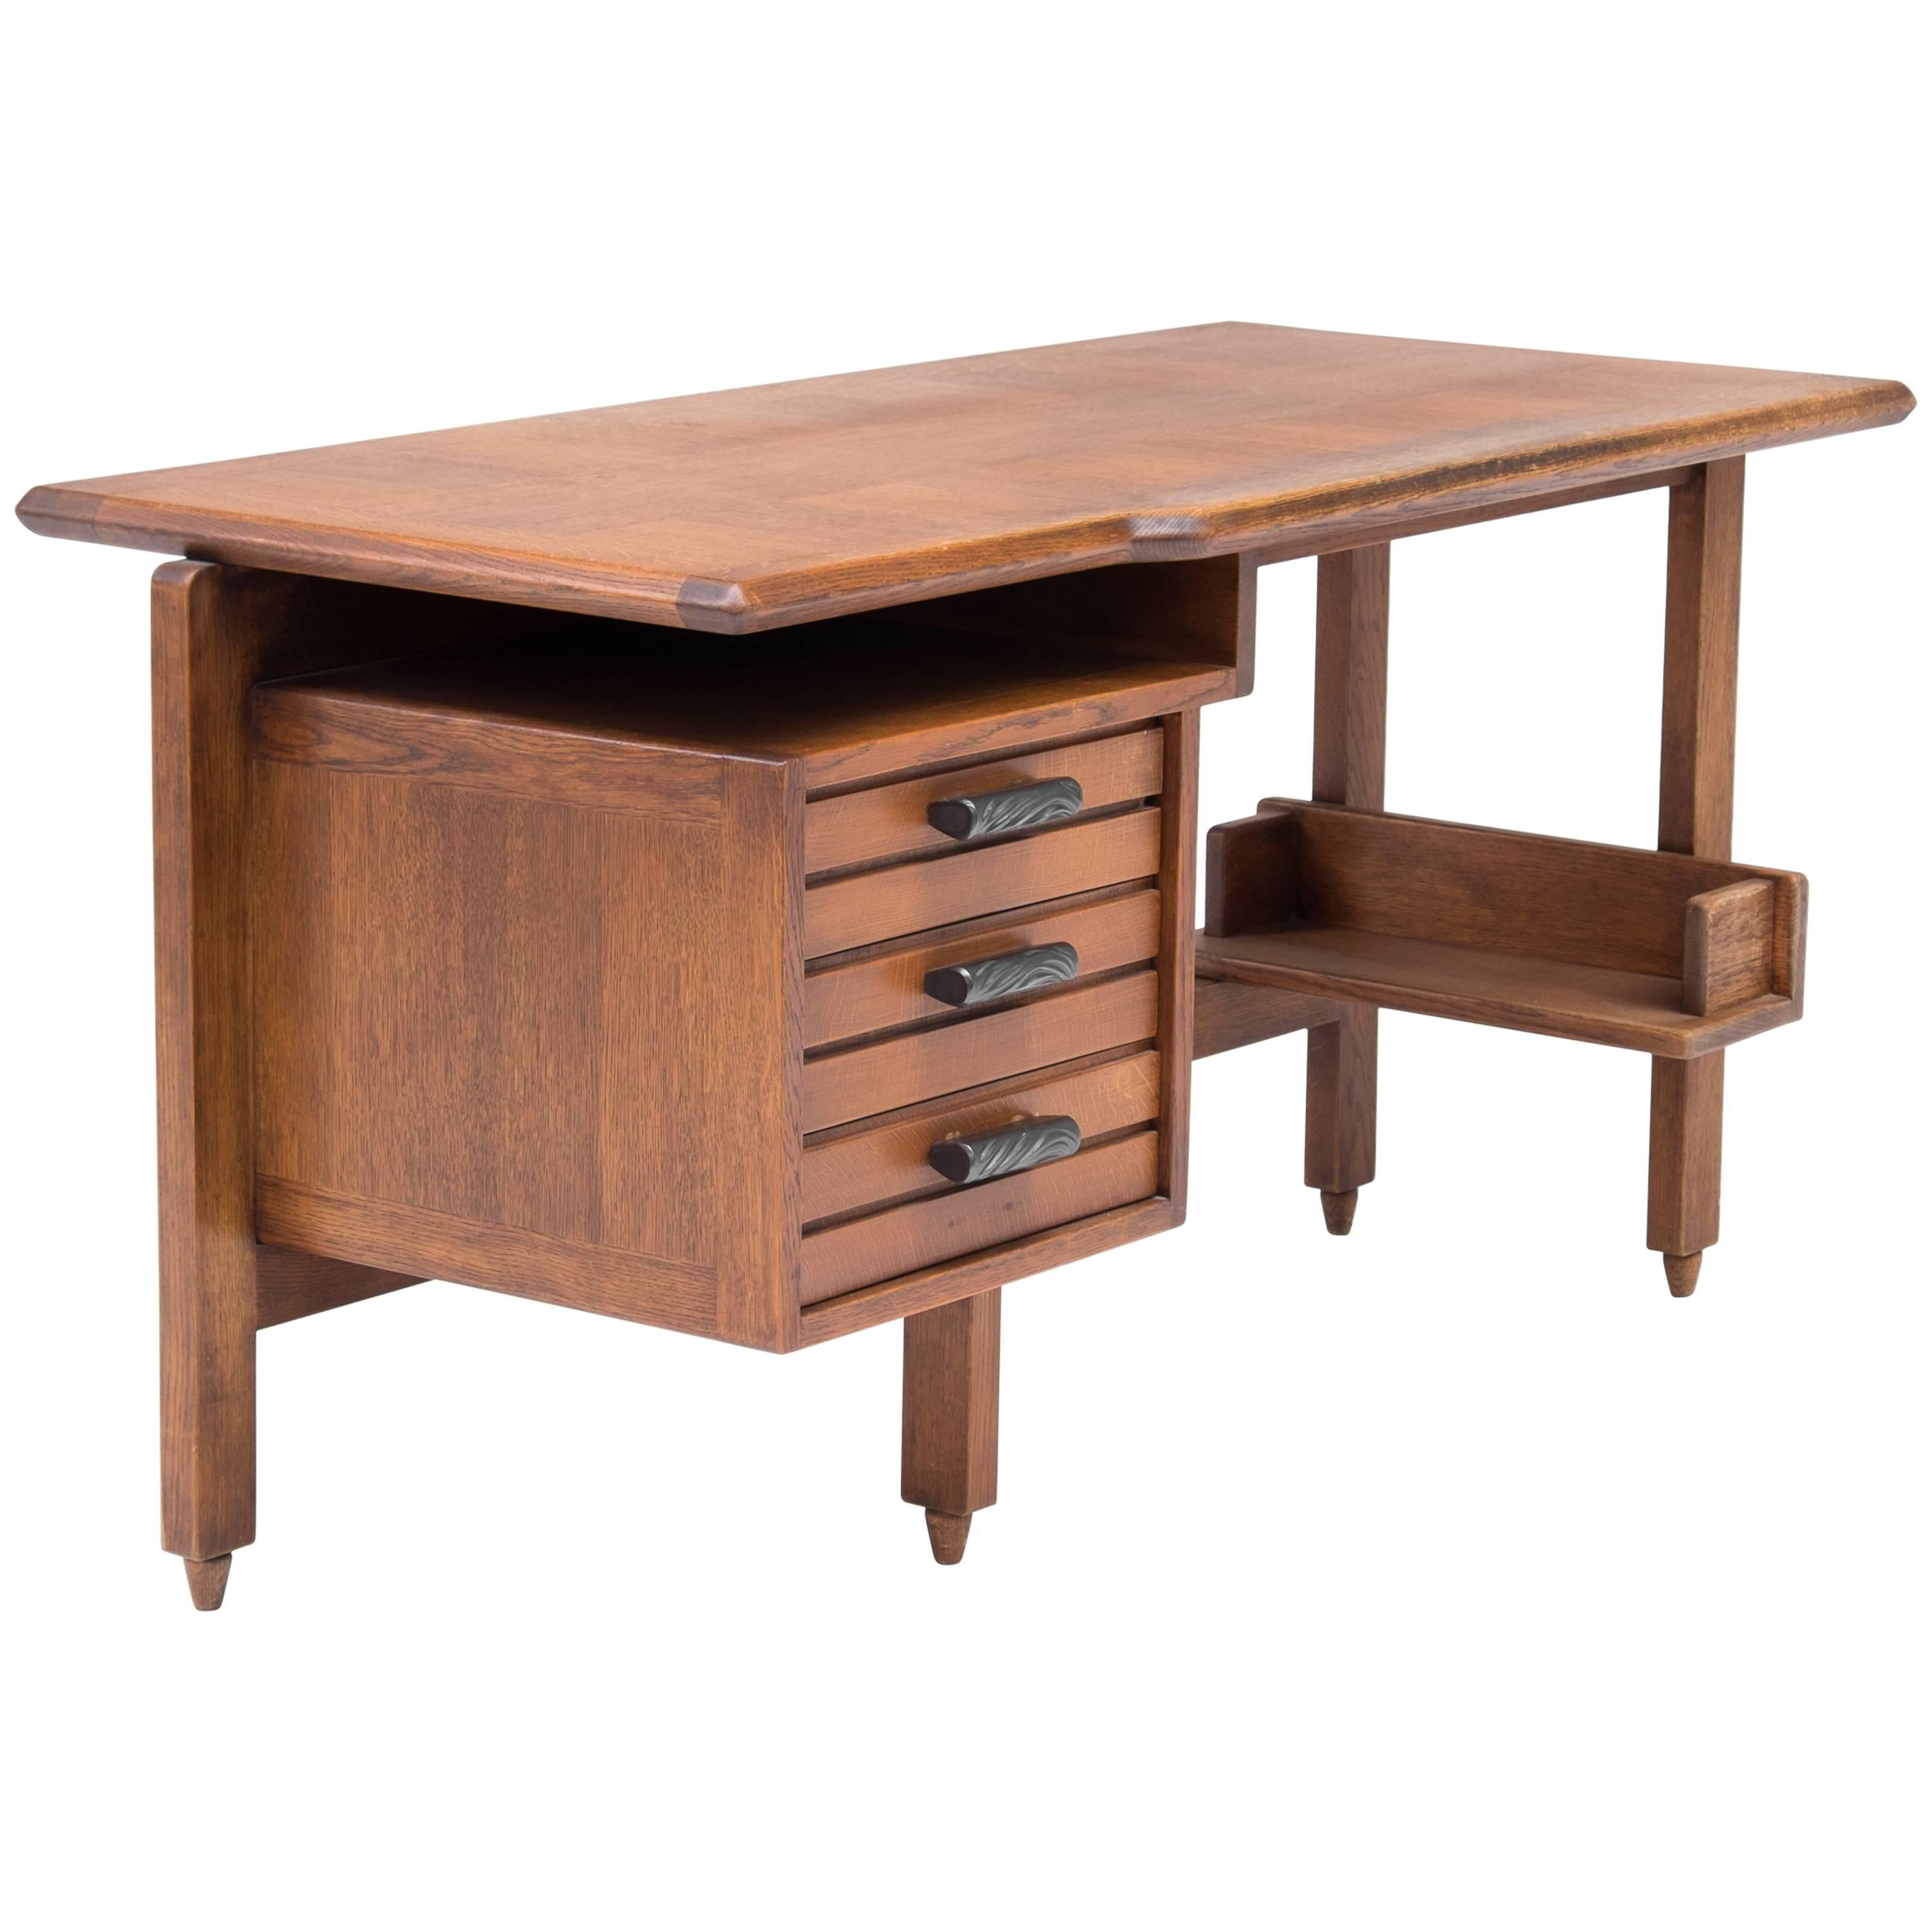 Guillerme et Chambron Desk in Oak with Ceramic Drawer Pulls, French, 1960s